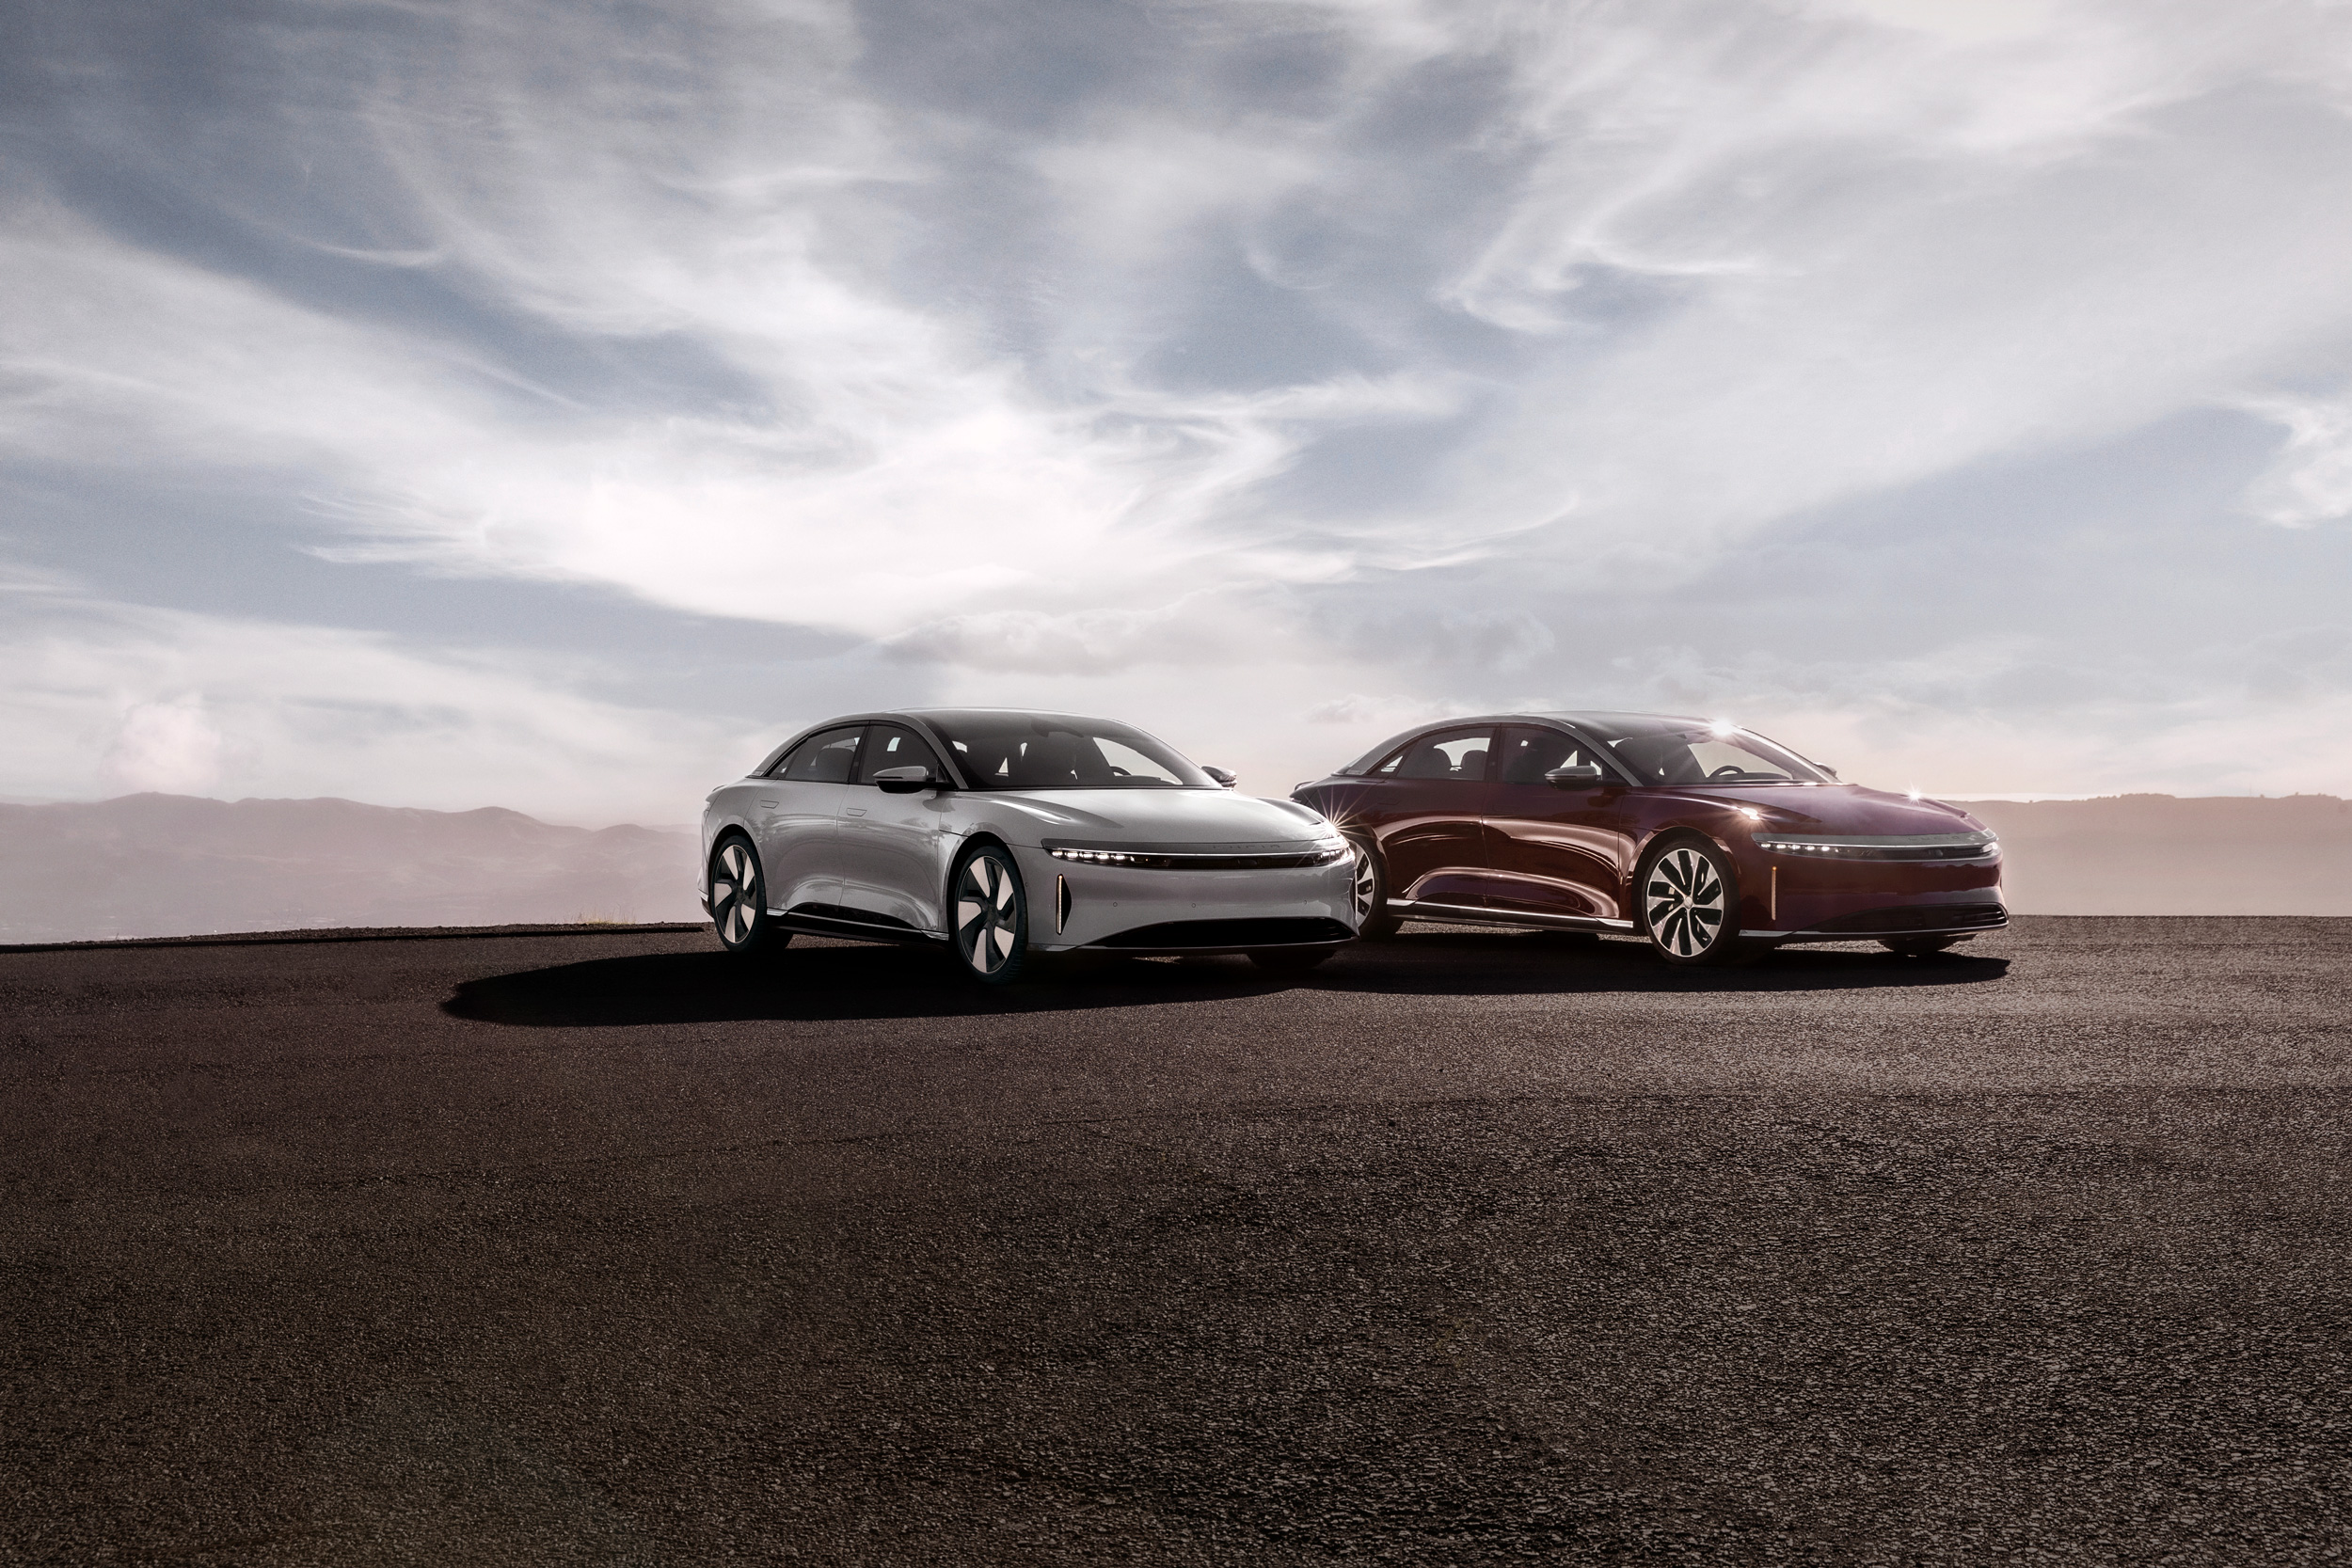 Lucid Motors Now Showing Full Order Numbers On Website To Some Customers